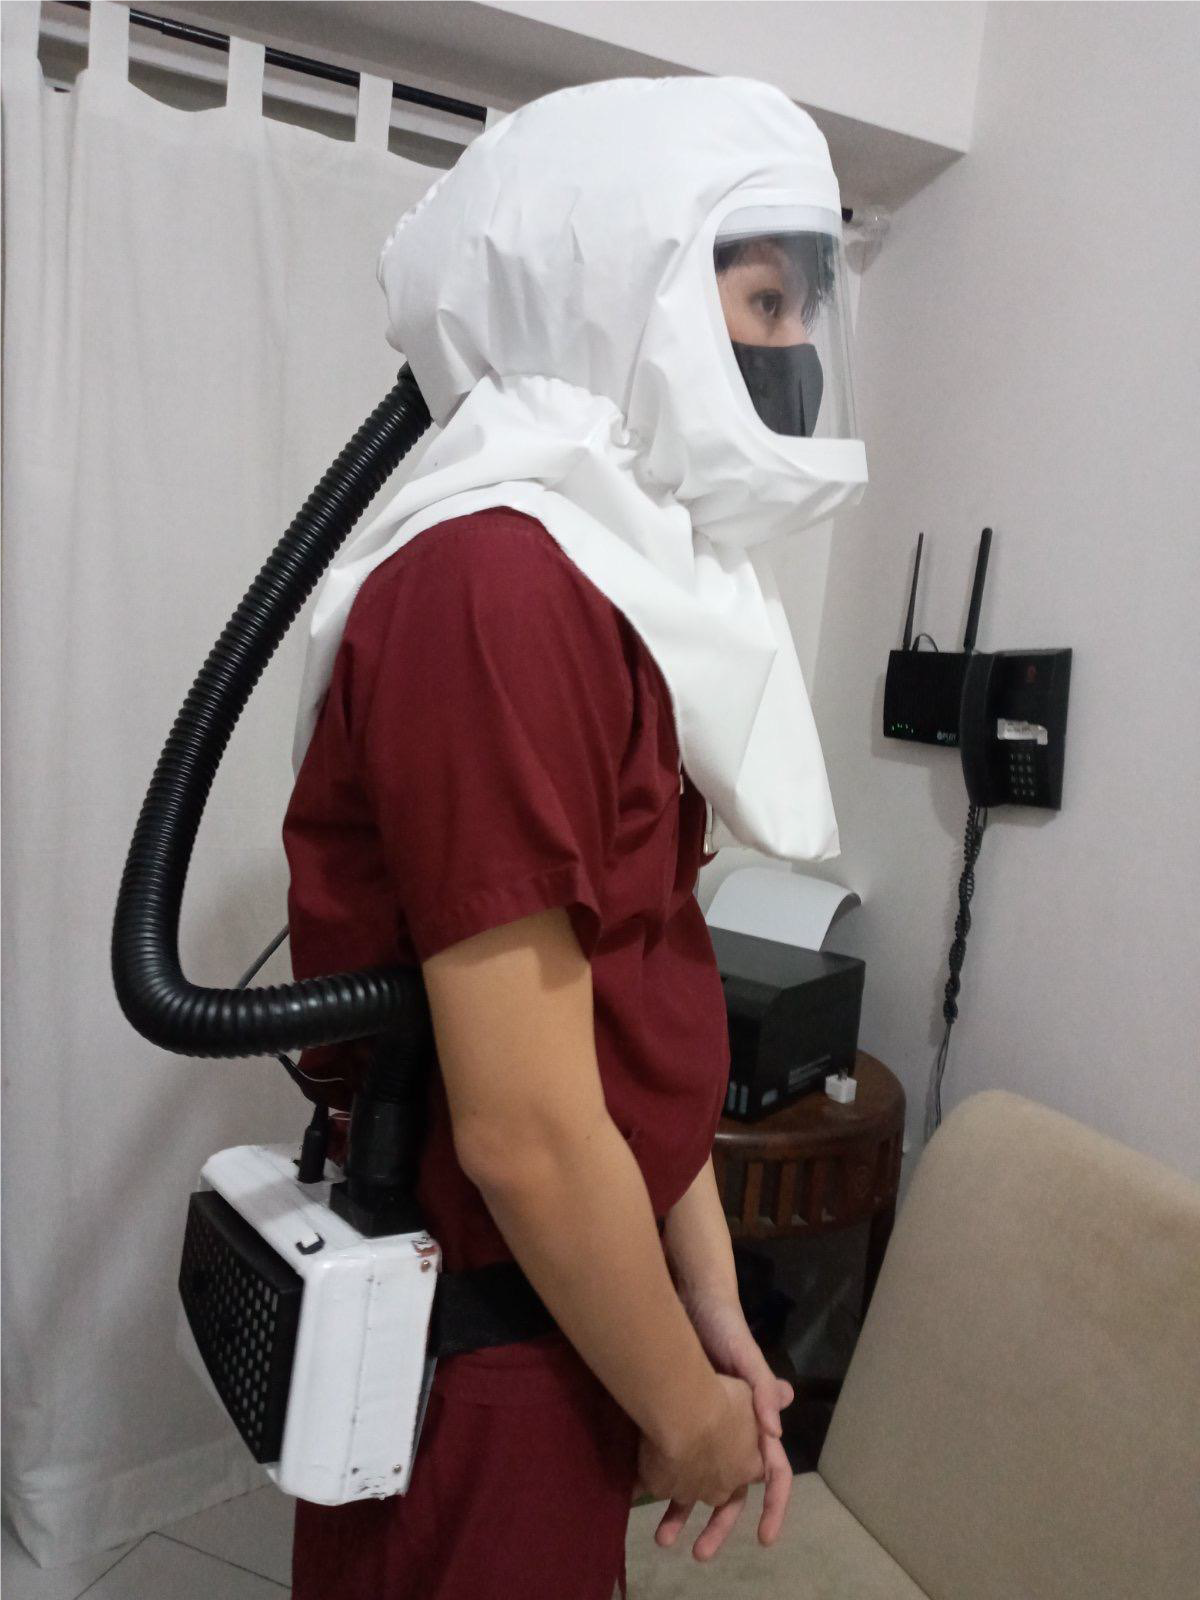 Powered Air-Purifying Respirator (PAPR): An Innovative Personal Protective Equipment